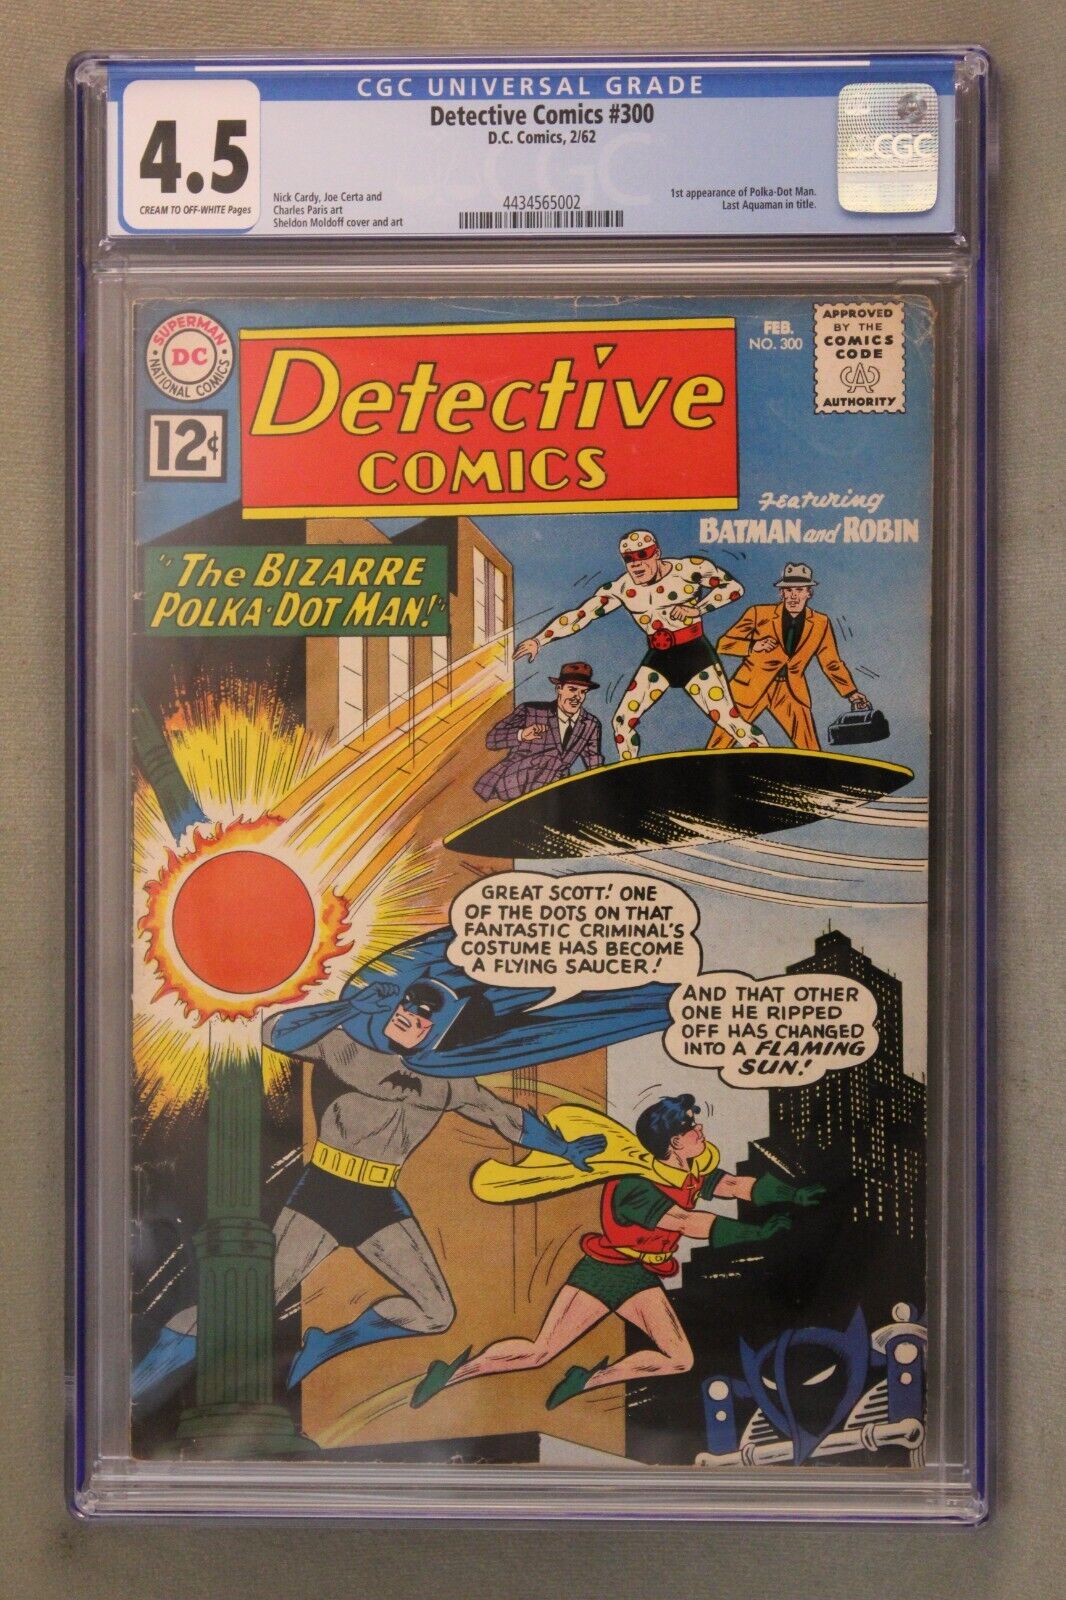 Detective Comics #300 ~ D.C., 2/62, CGC Graded at 4.5 Cream to Off-White Pages